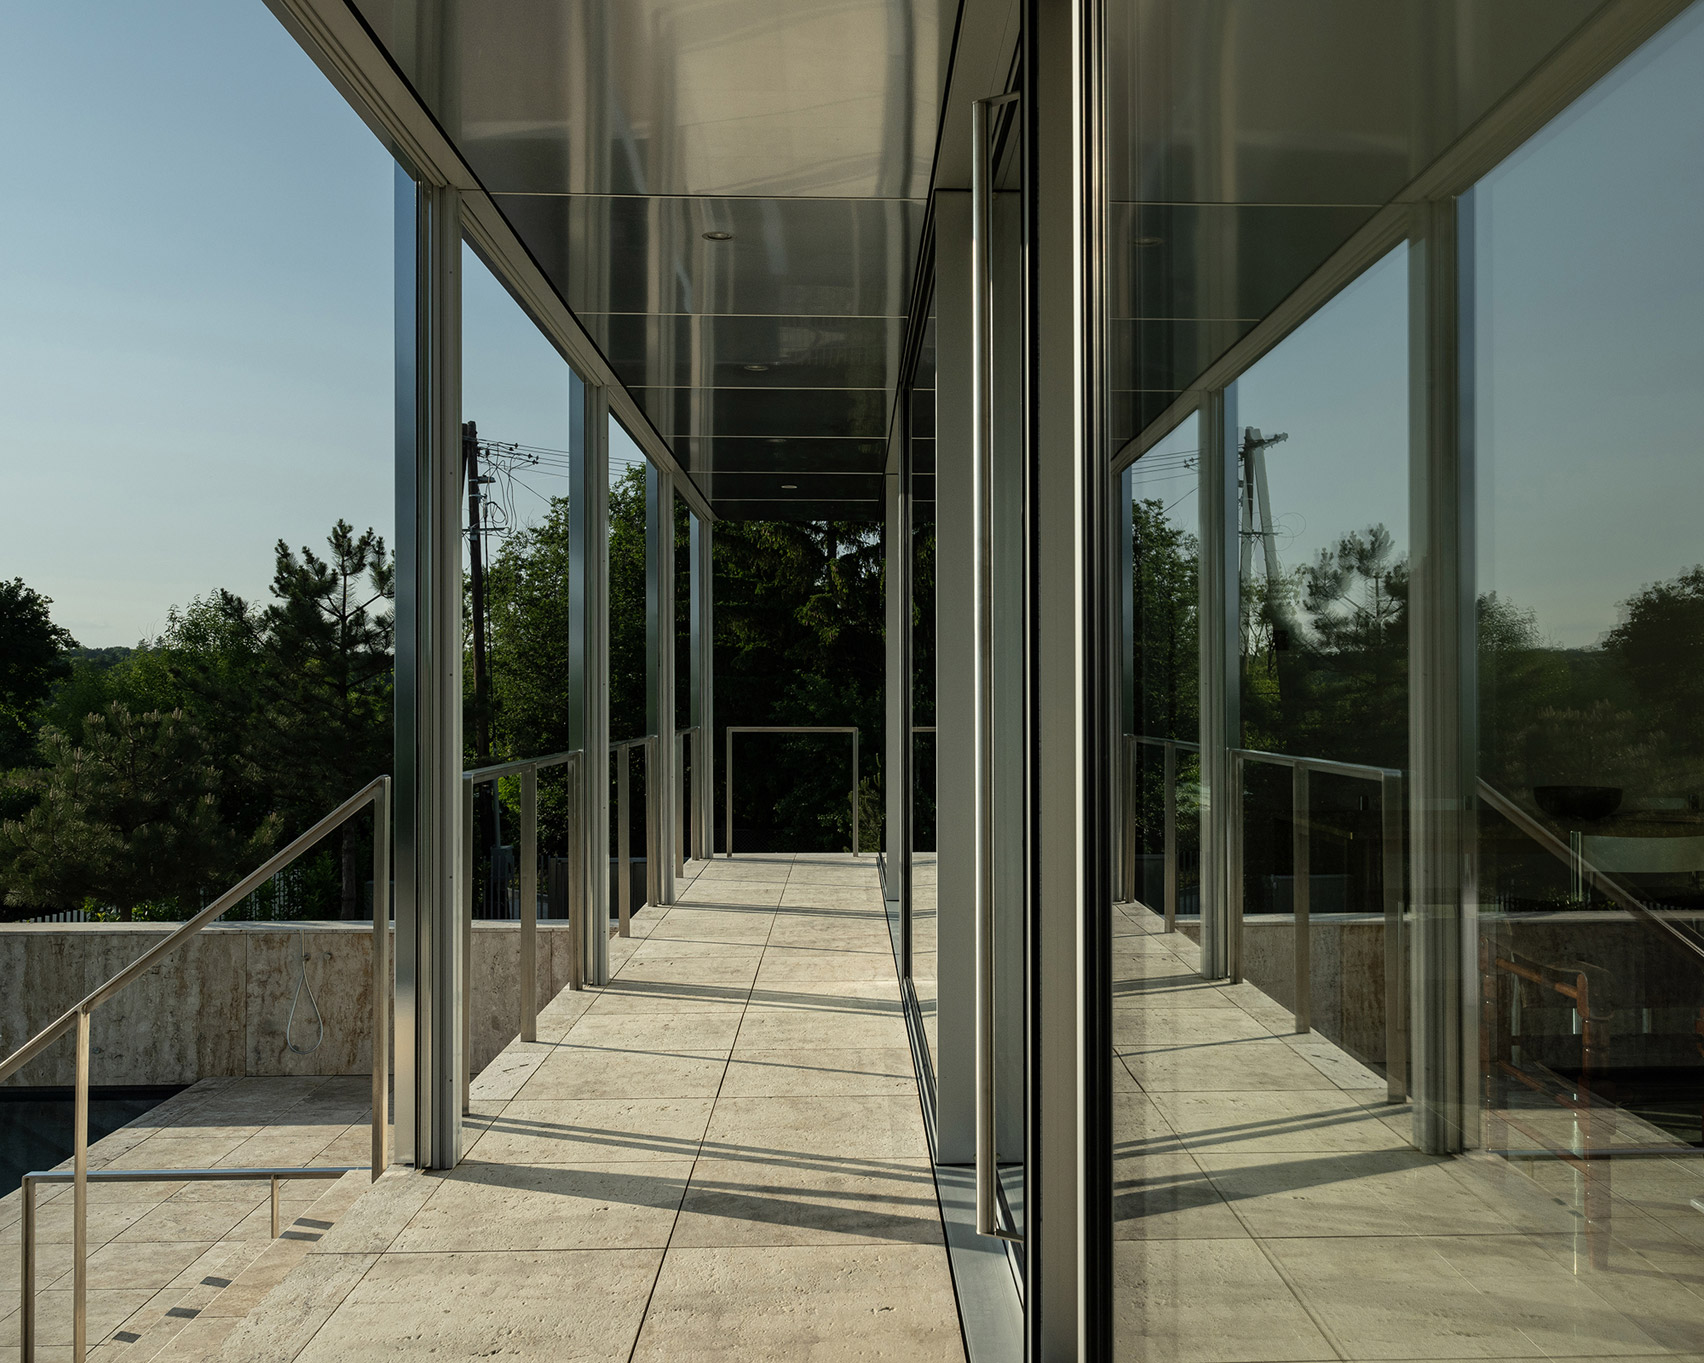 Walkway outside steel and glass pavilion in Hungary